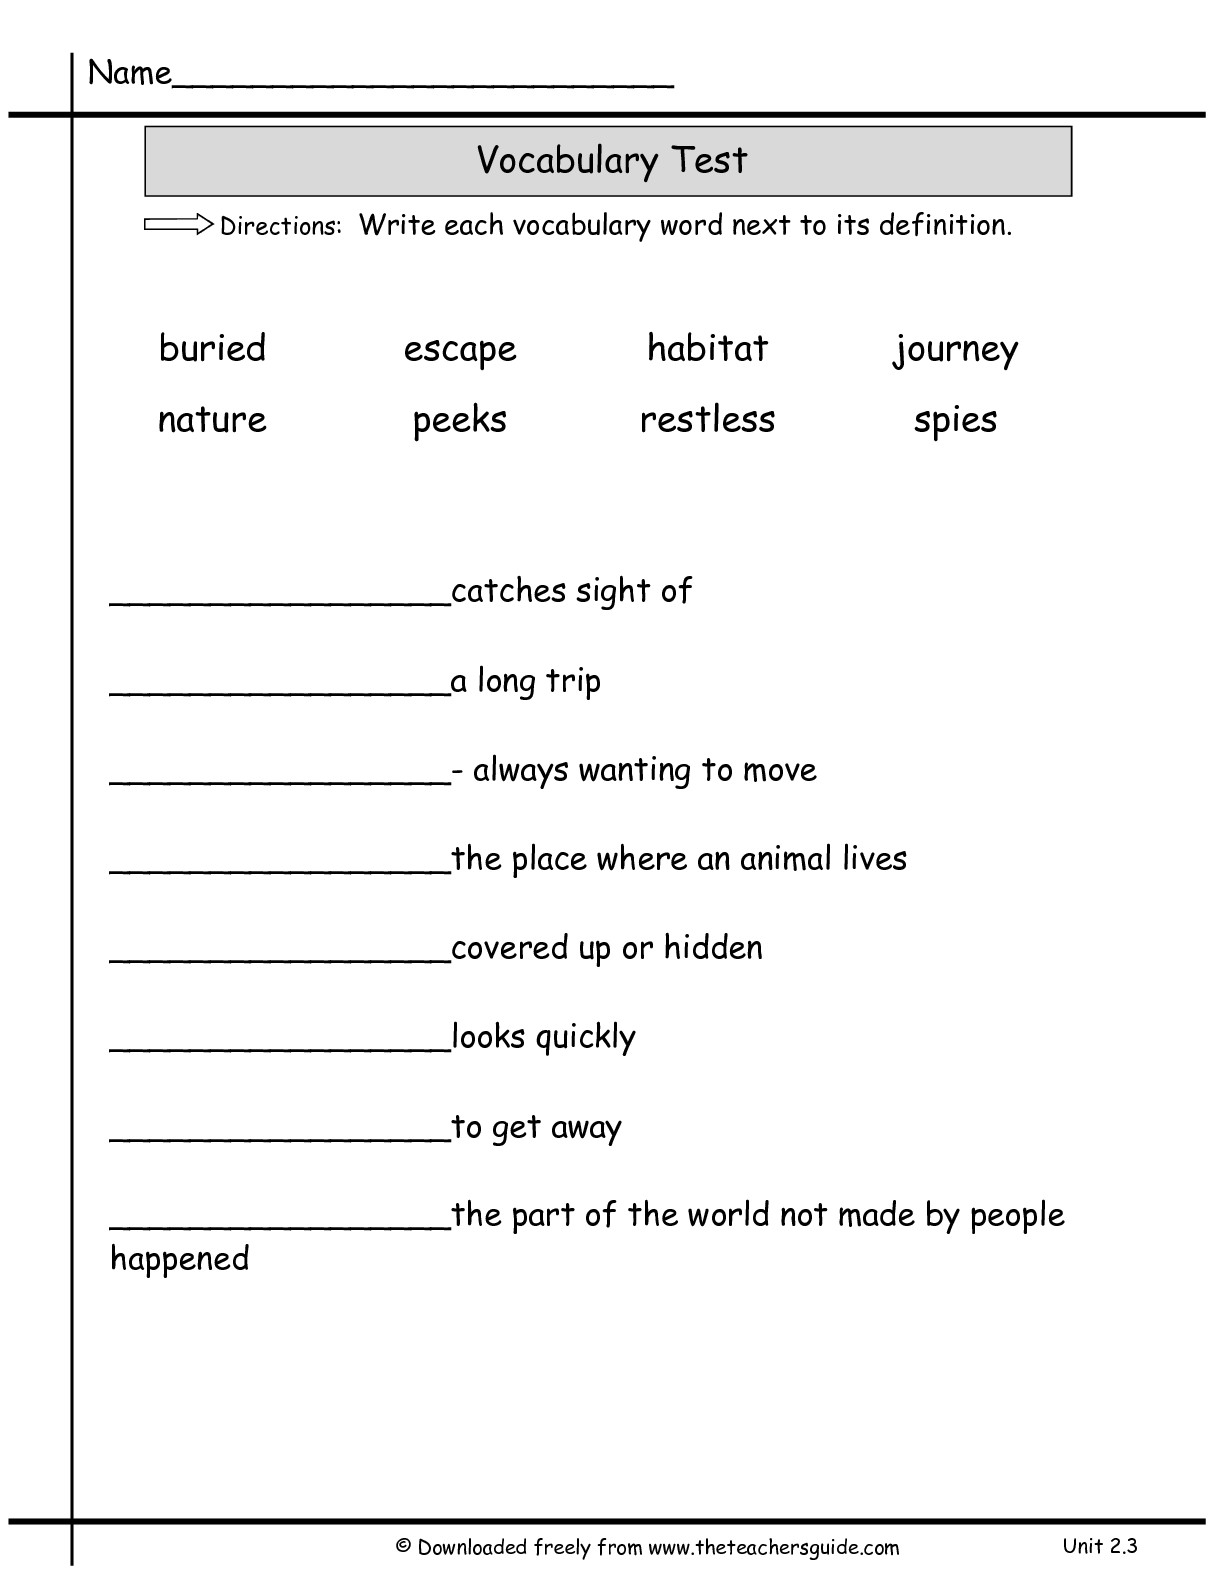 13 Best Images of Vocabulary Practice Worksheets 3rd